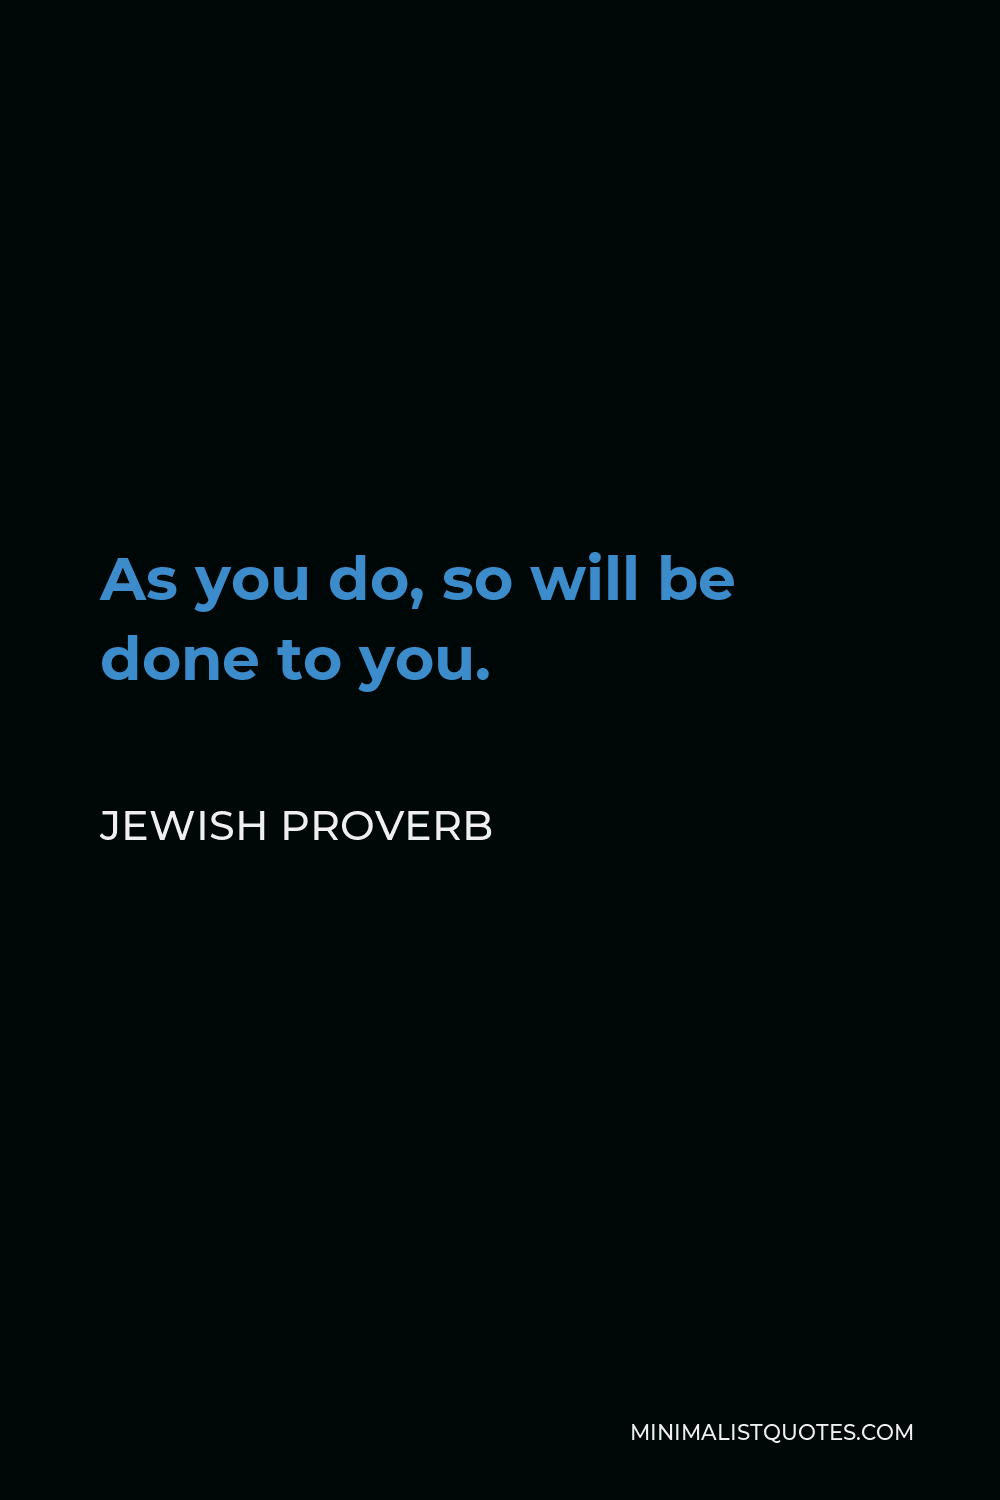 Jewish Proverb Quote - As you do, so will be done to you.